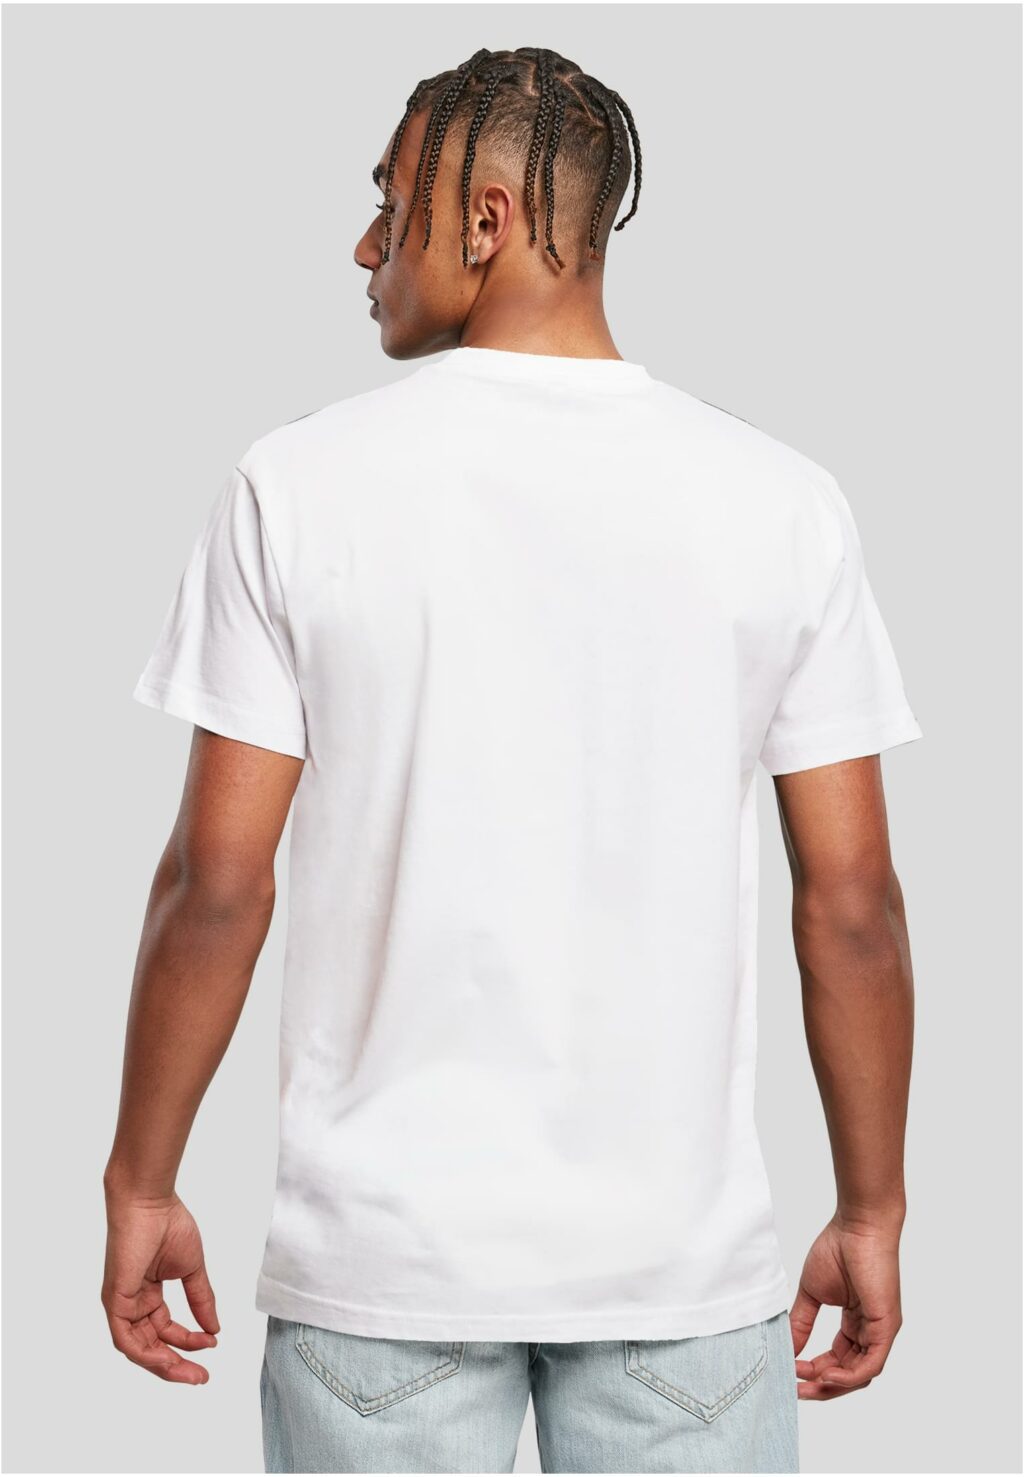 Thank Me Later Tee white MT2370